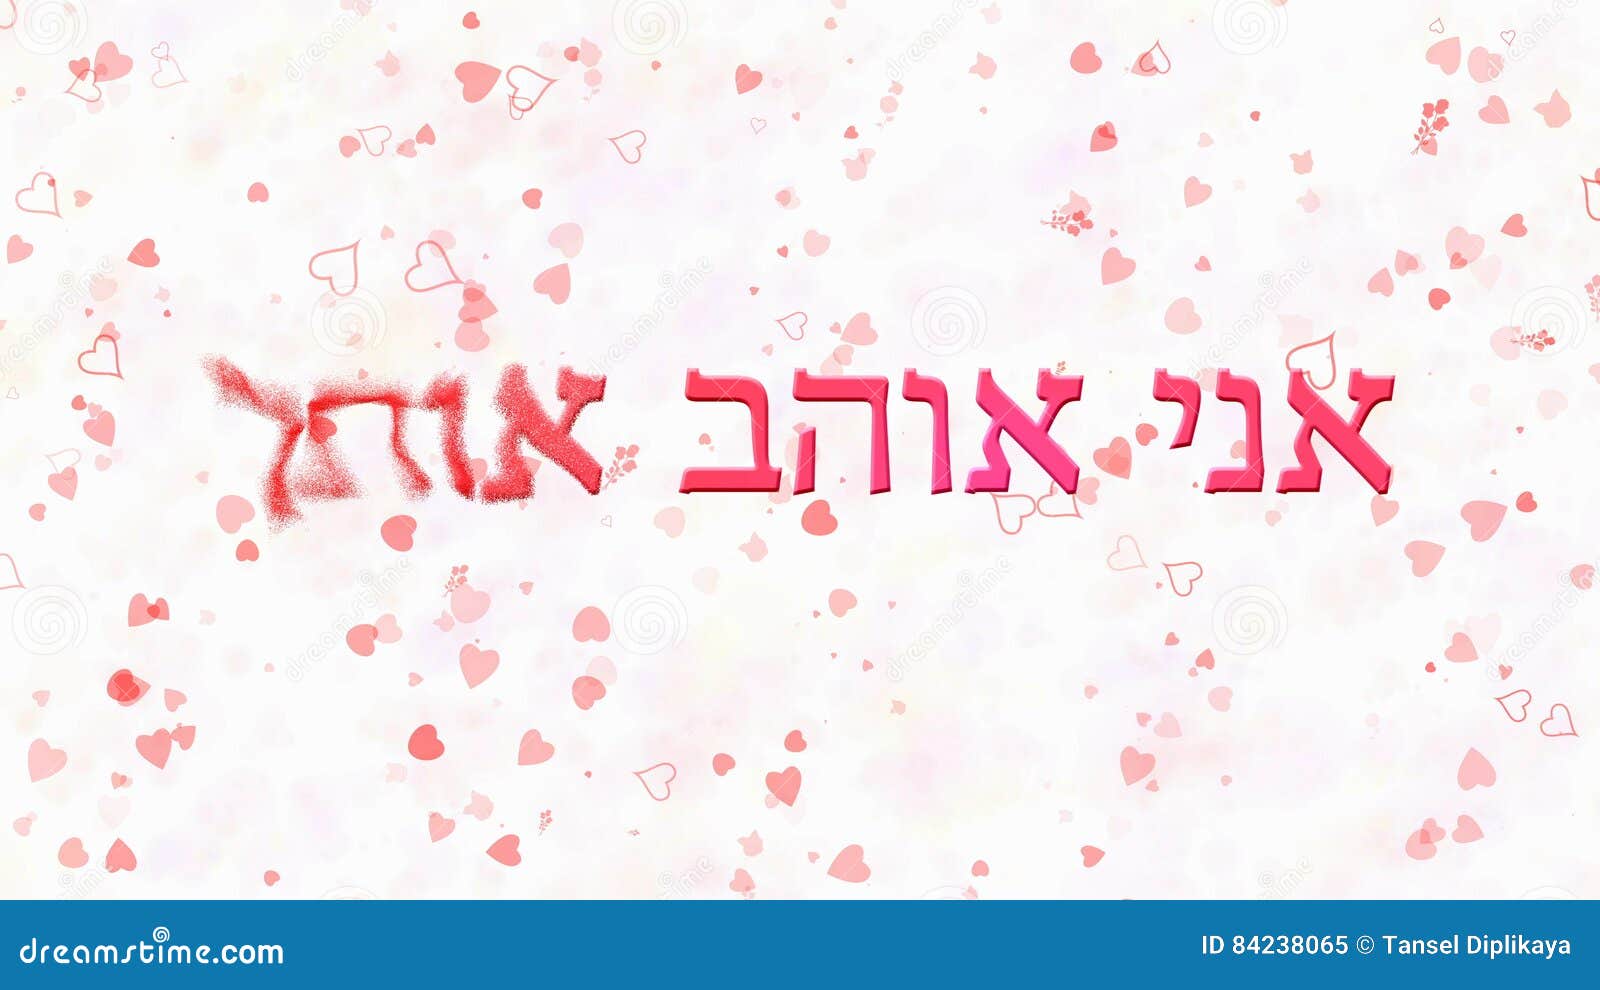 I Love You Text In Hebrew Turns To Dust From Left On White Background Stock Illustration